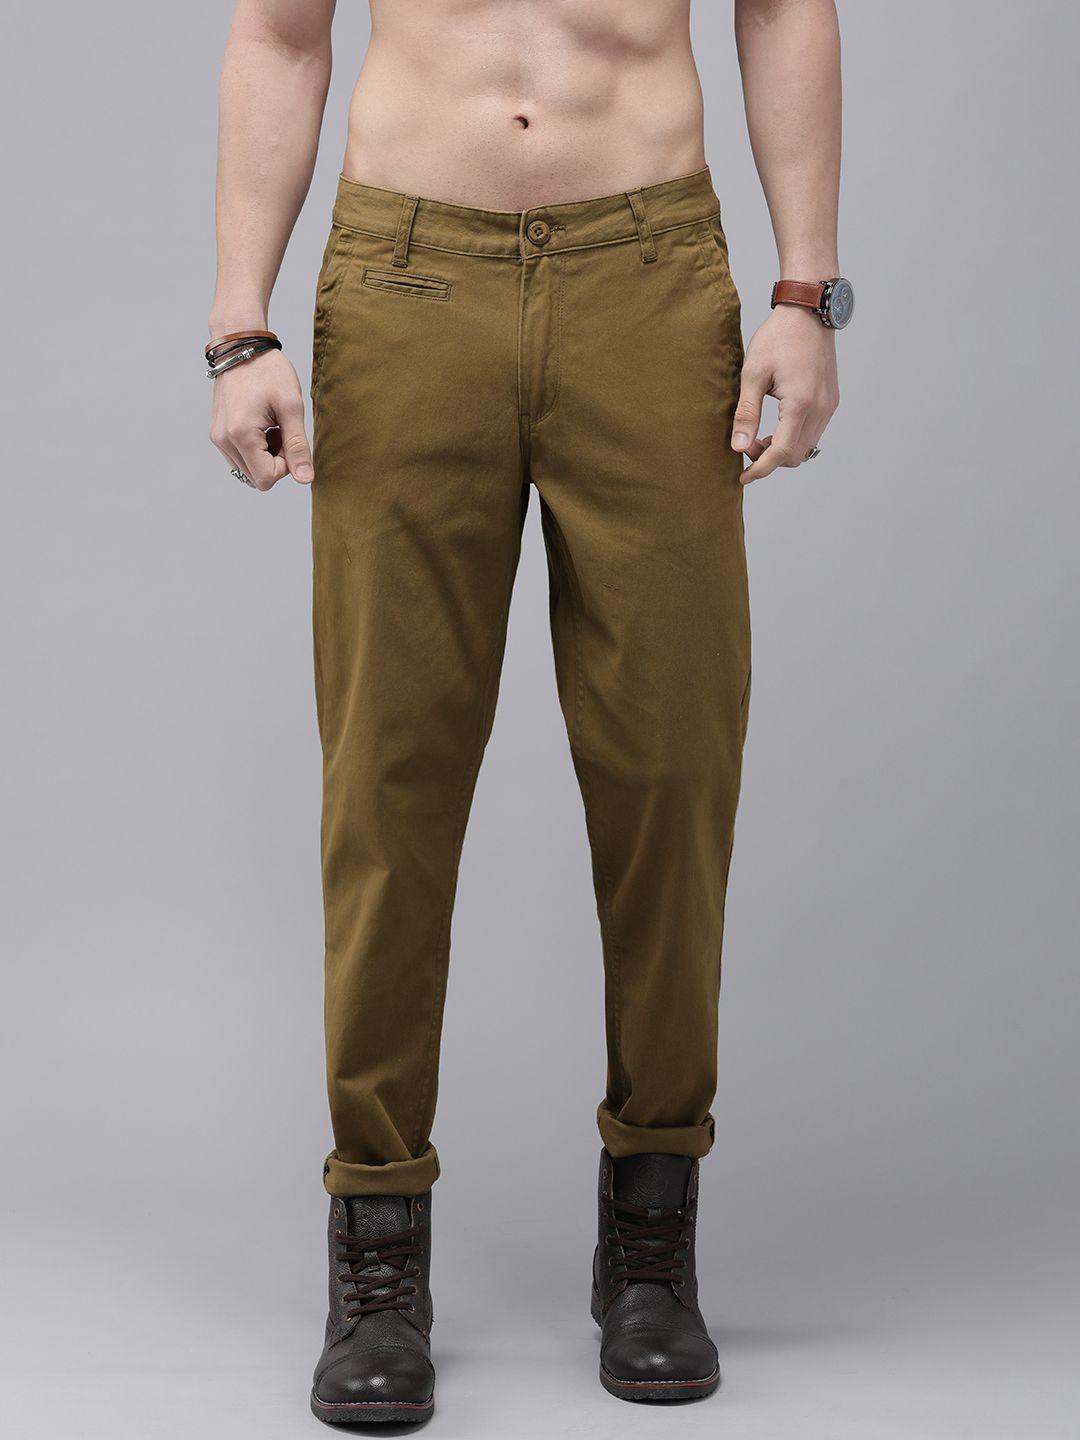 roadster-men-olive-green-solid-mid-rise-casual-chinos-trousers